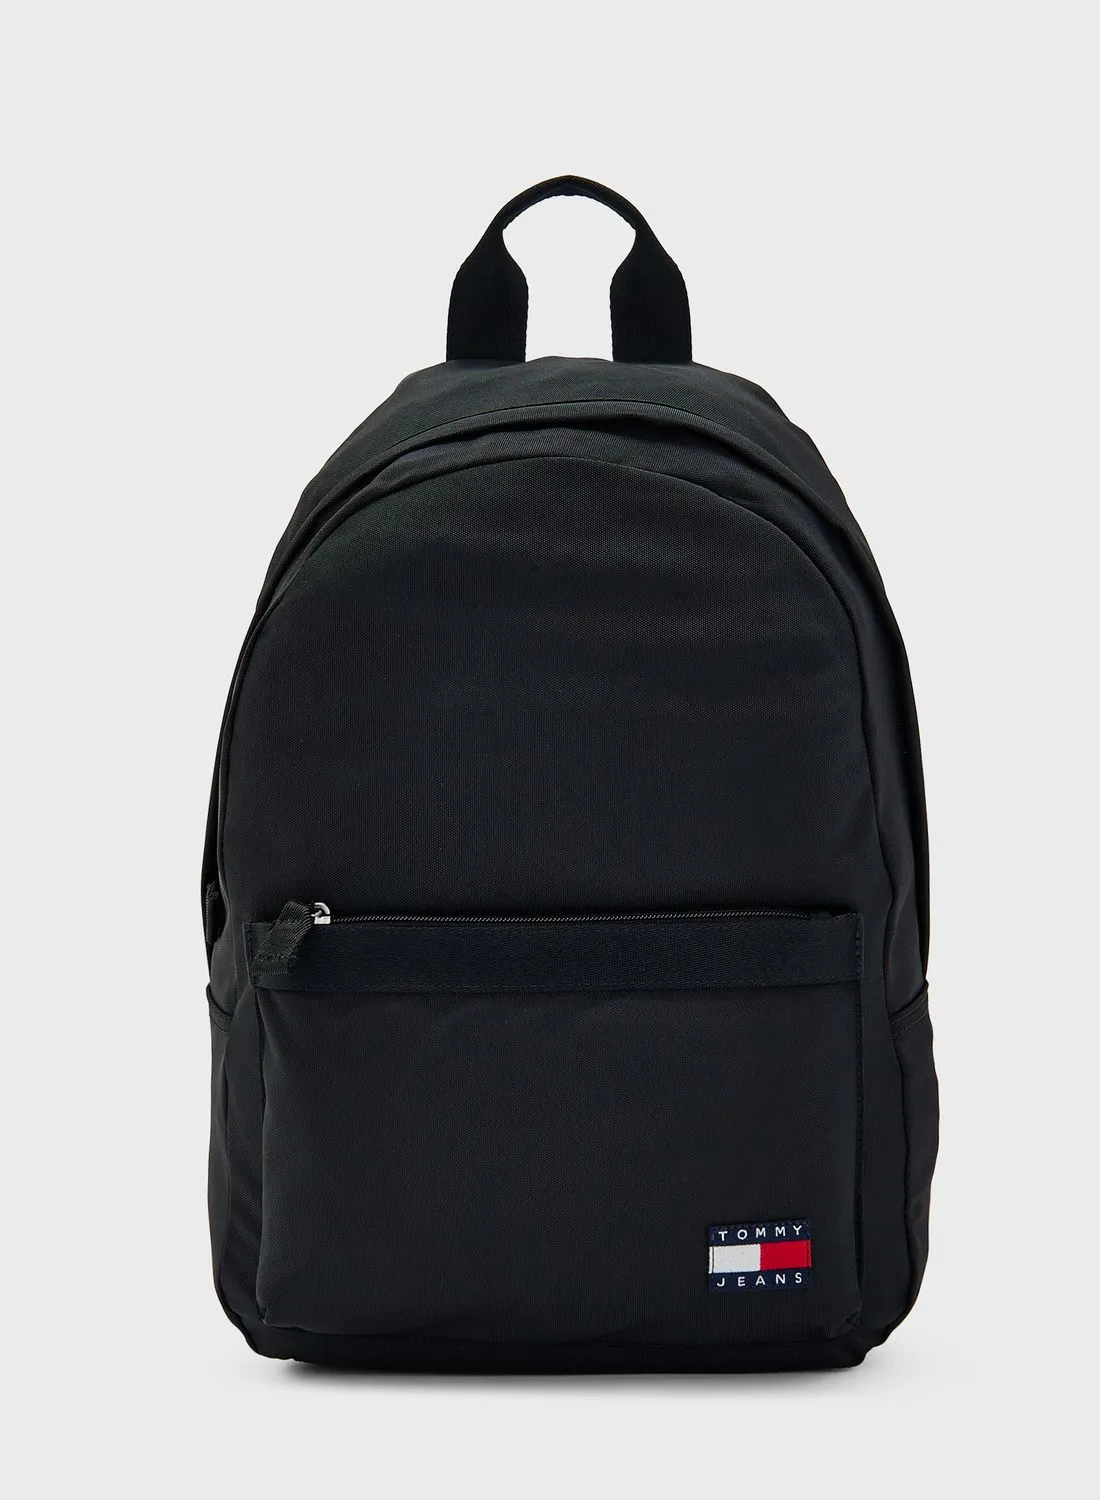 TOMMY HILFIGER Daily Dome Backpack